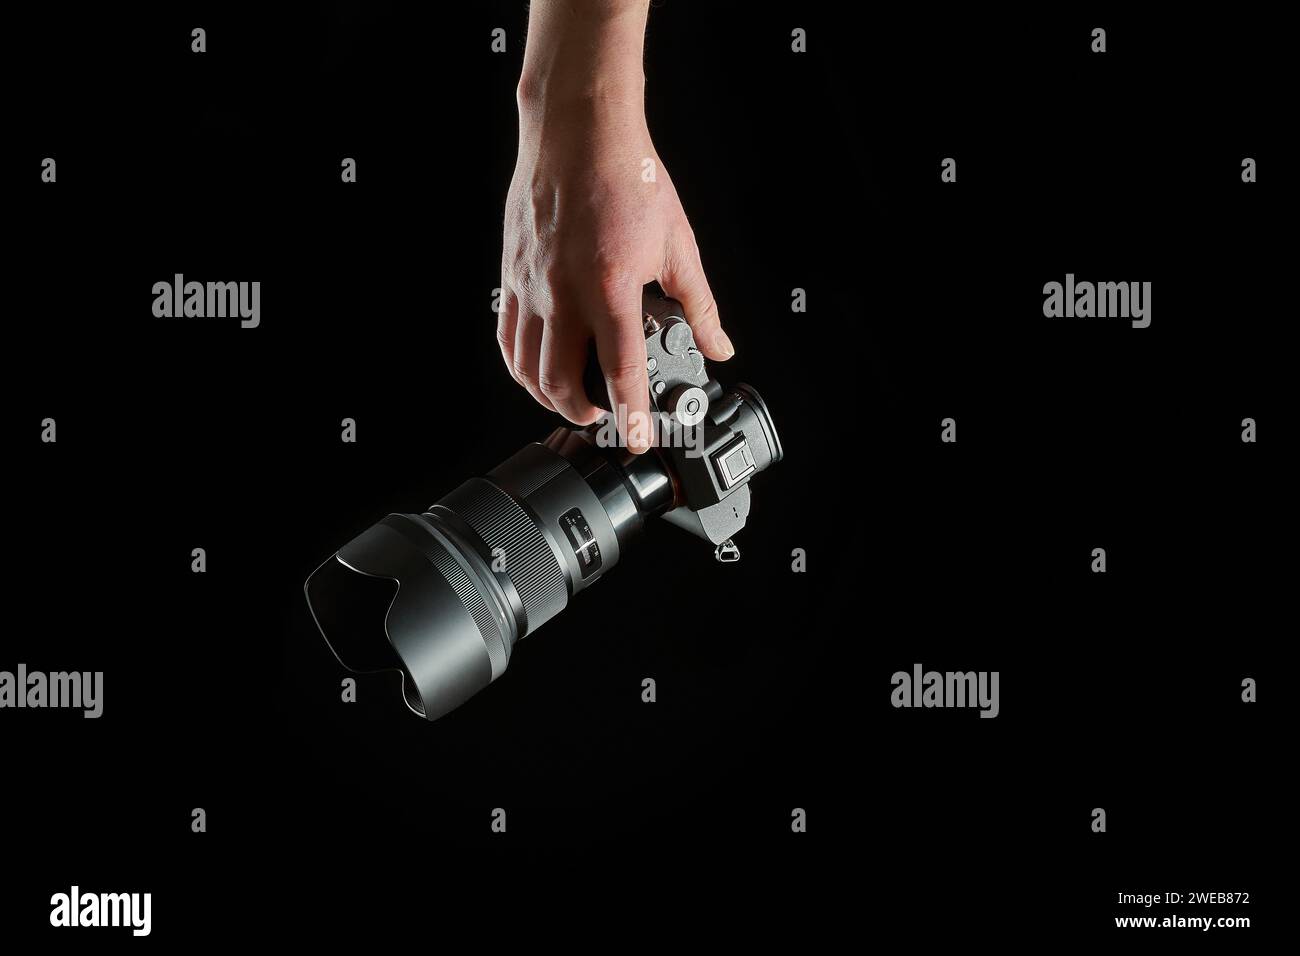 young photographer holding a mirrorless camera in his hand isolated on black background Stock Photo